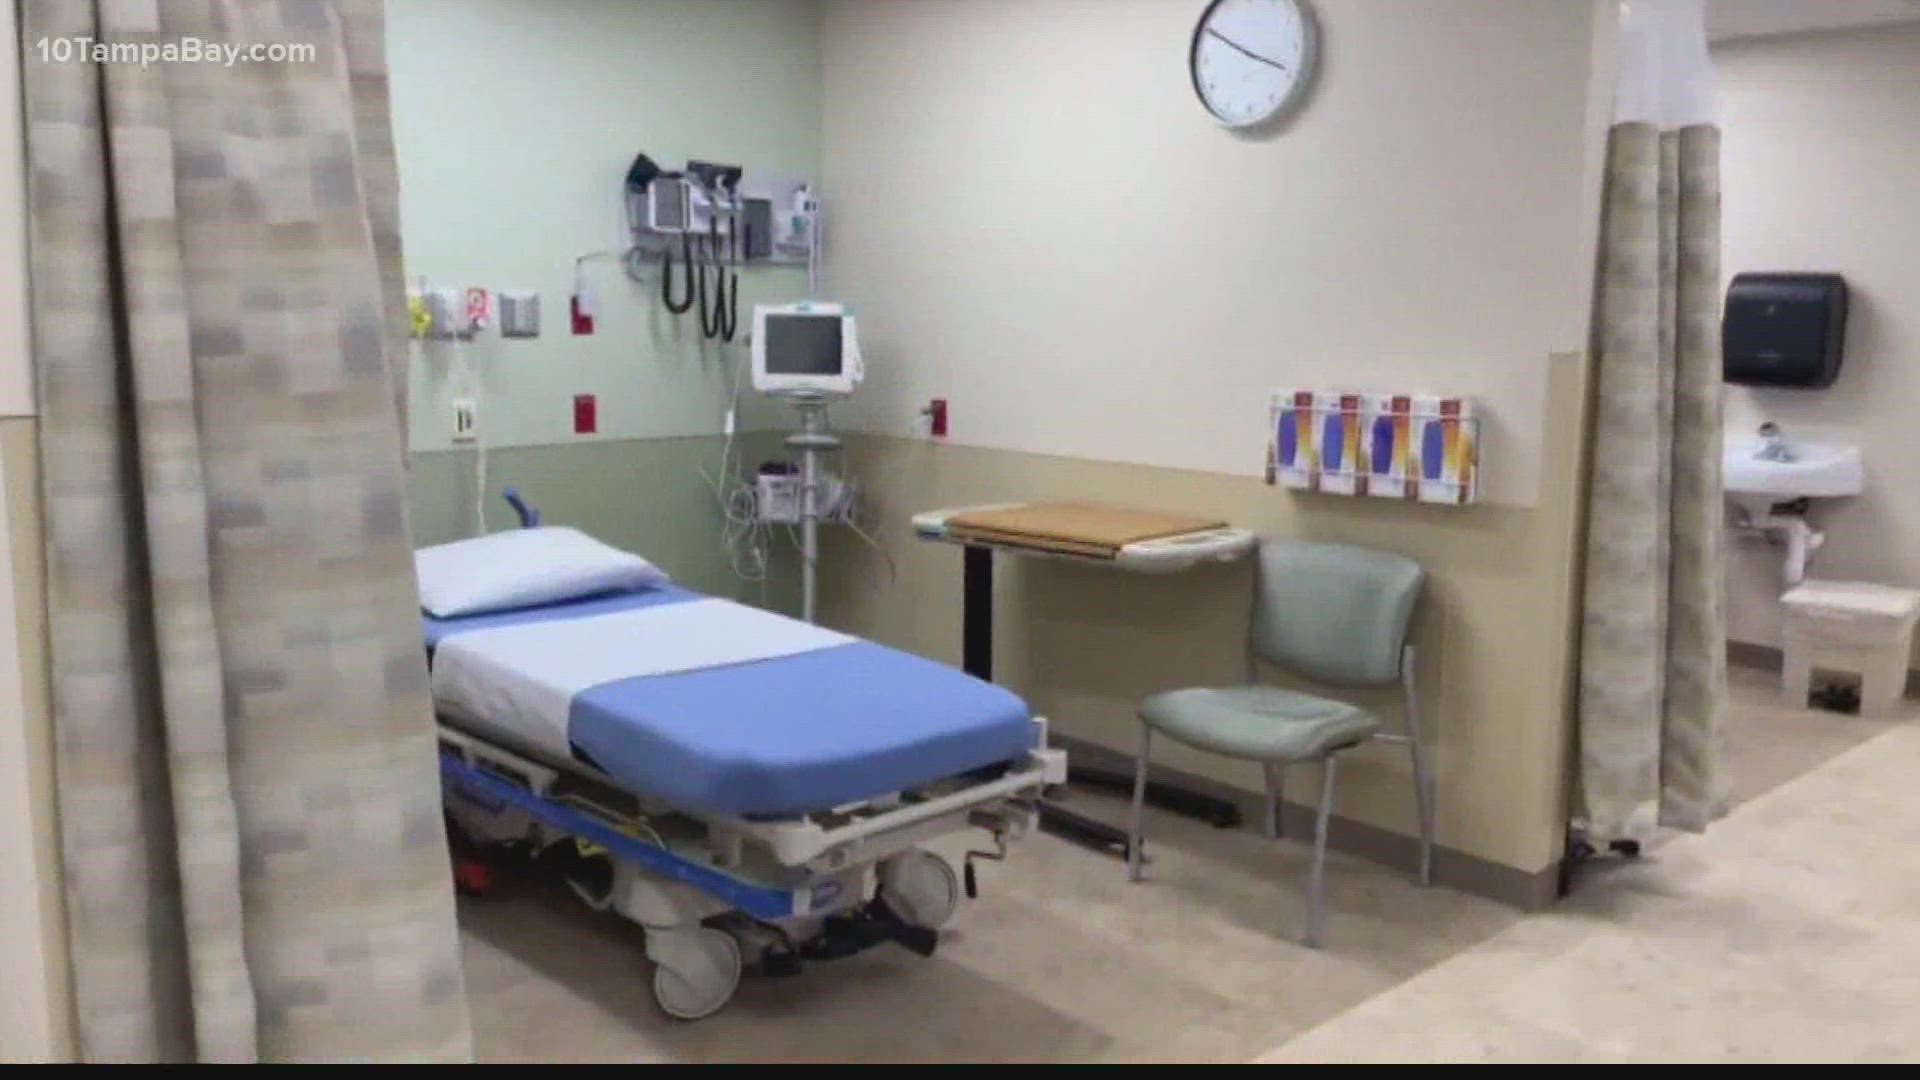 No visitors are allowed for patients at Sarasota Memorial except in special situations like end-of-life care.